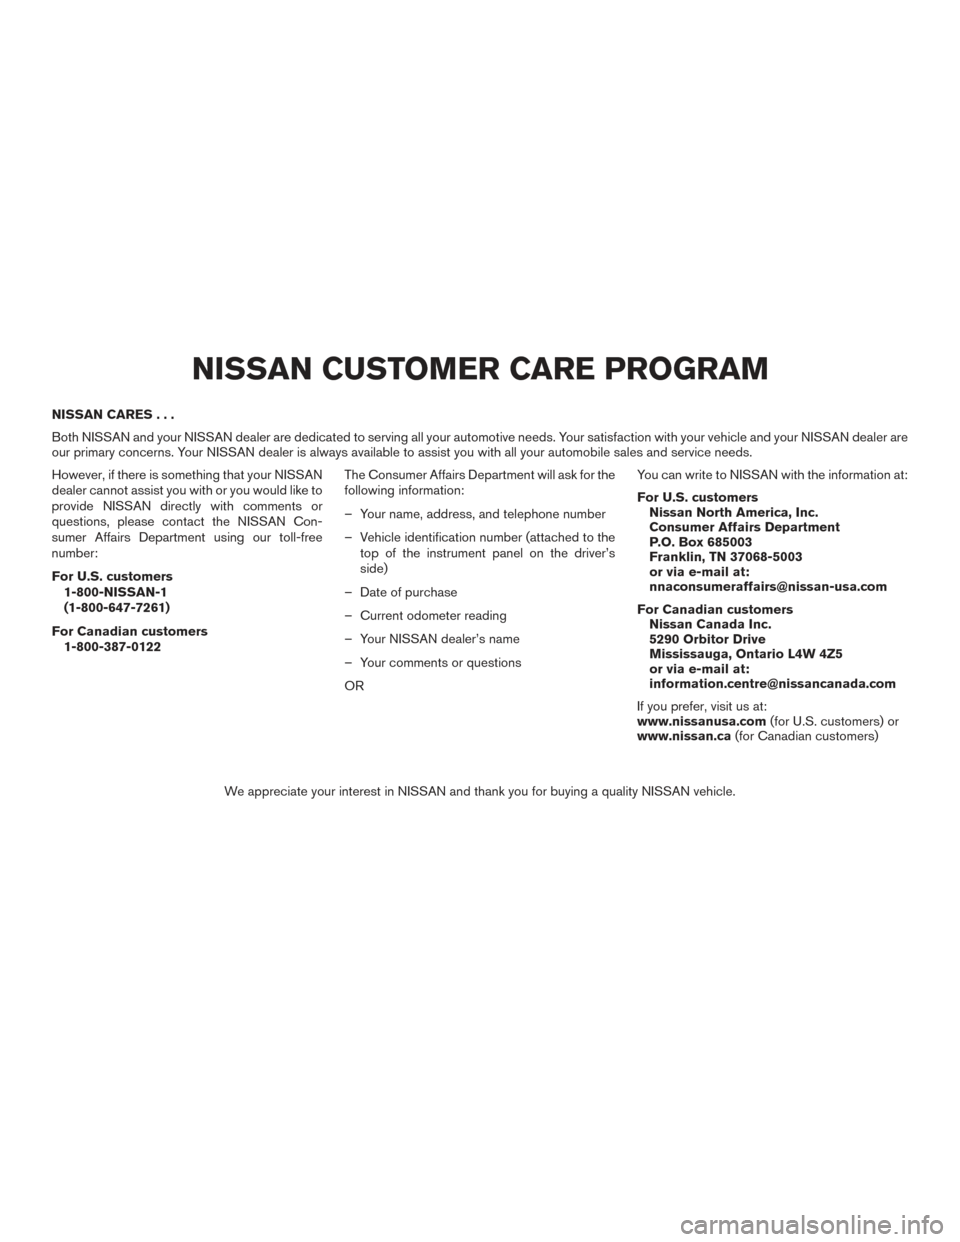 NISSAN FRONTIER 2015 D23 / 3.G Owners Manual NISSAN CARES...
Both NISSAN and your NISSAN dealer are dedicated to serving all your automotive needs. Your satisfaction with your vehicle and your NISSAN dealer are
our primary concerns. Your NISSAN 